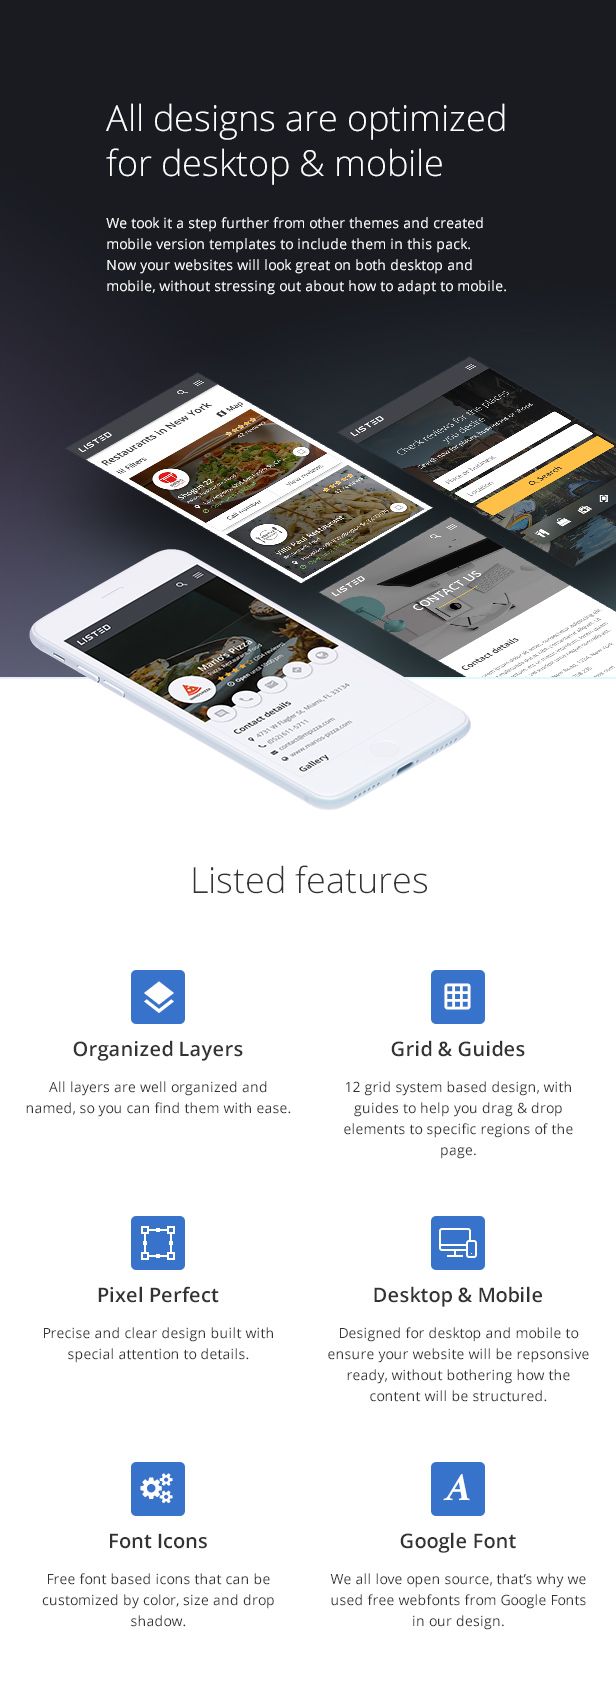 Listed - Directory Listing PSD Template